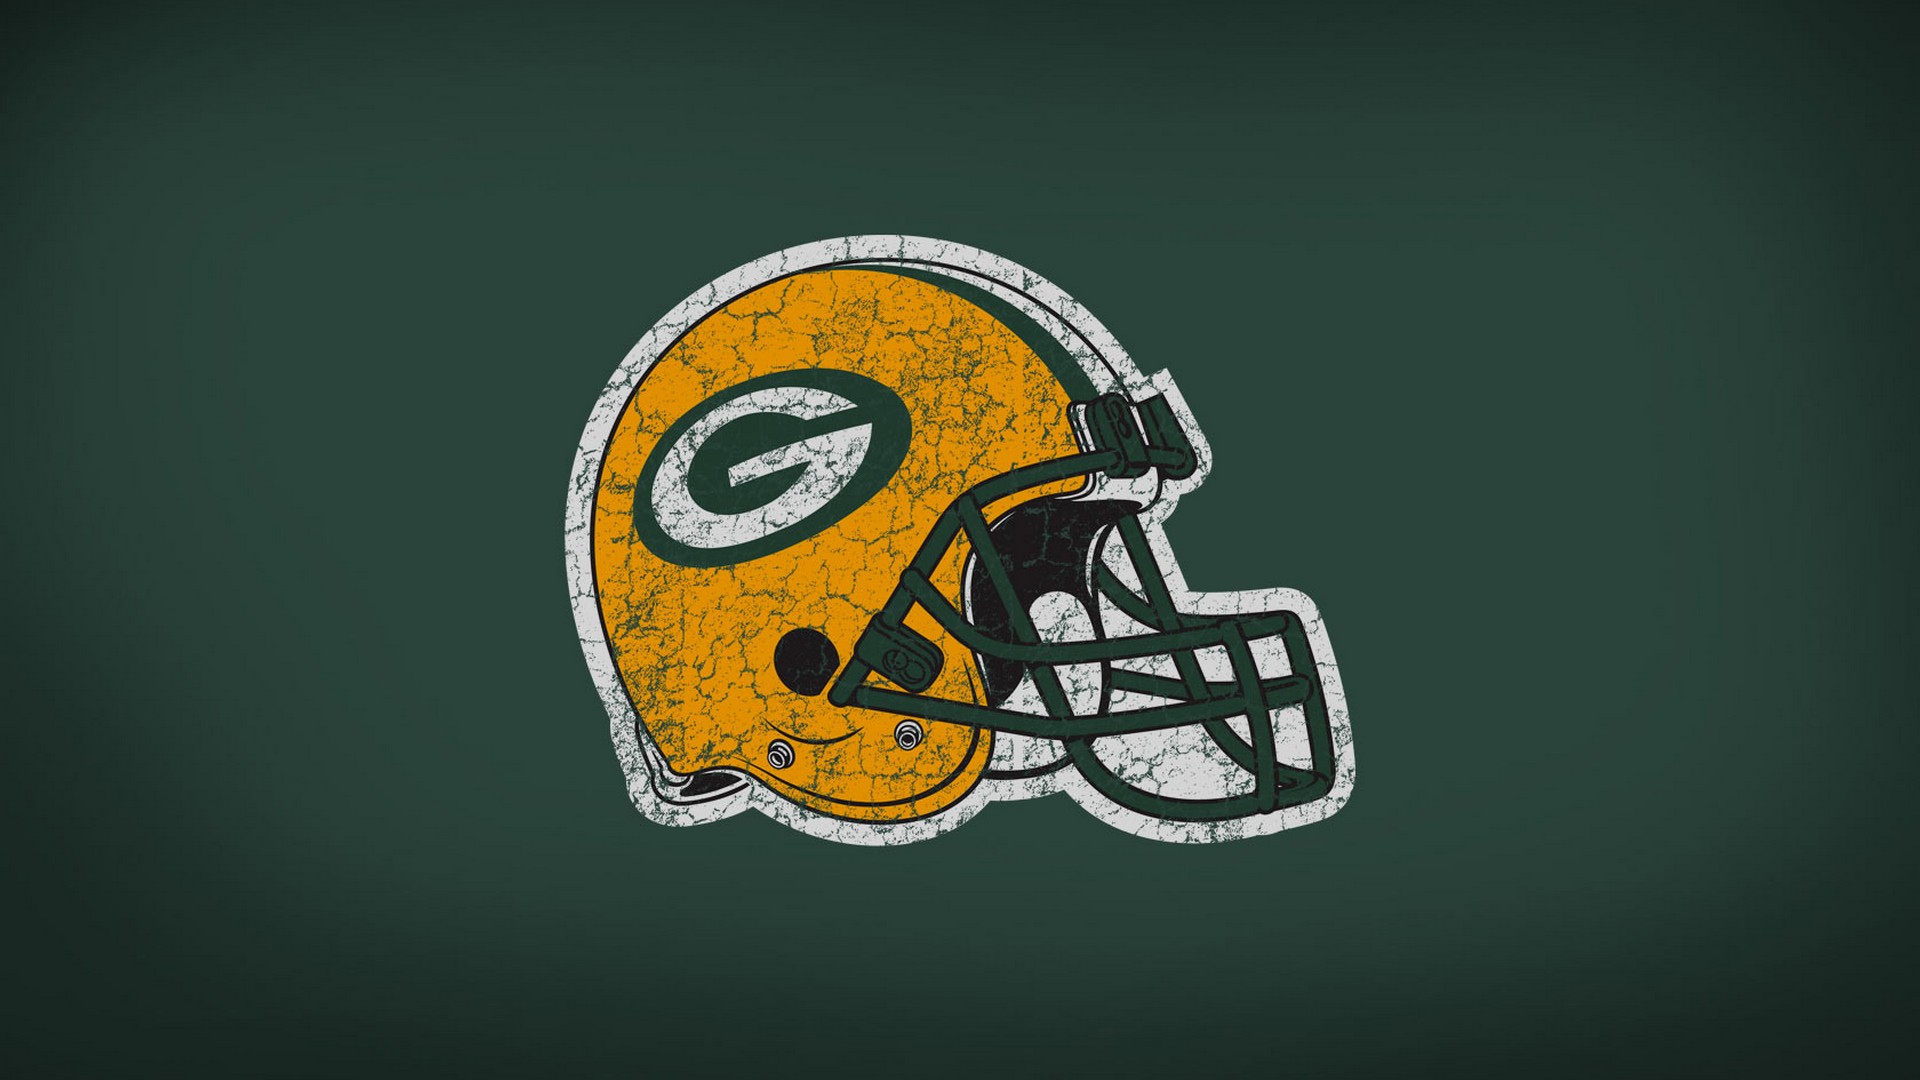 Green Bay Packers Mac Wallpaper with high-resolution 1920x1080 pixel. Download and set as wallpaper for Desktop Computer, Apple iPhone X, XS Max, XR, 8, 7, 6, SE, iPad, Android